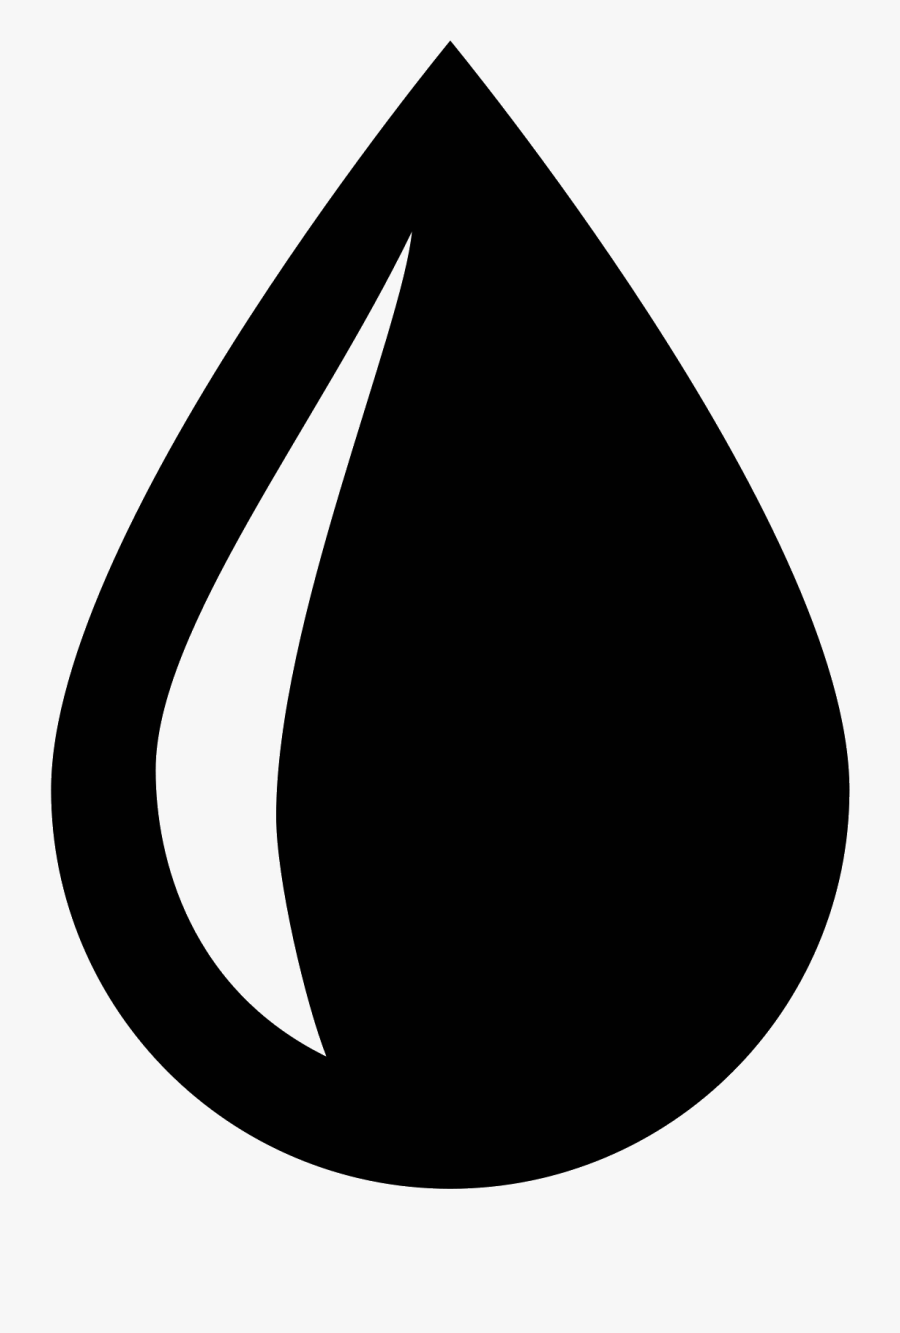 Drops Clipart Curved Water - Water Icon Png, Transparent Clipart